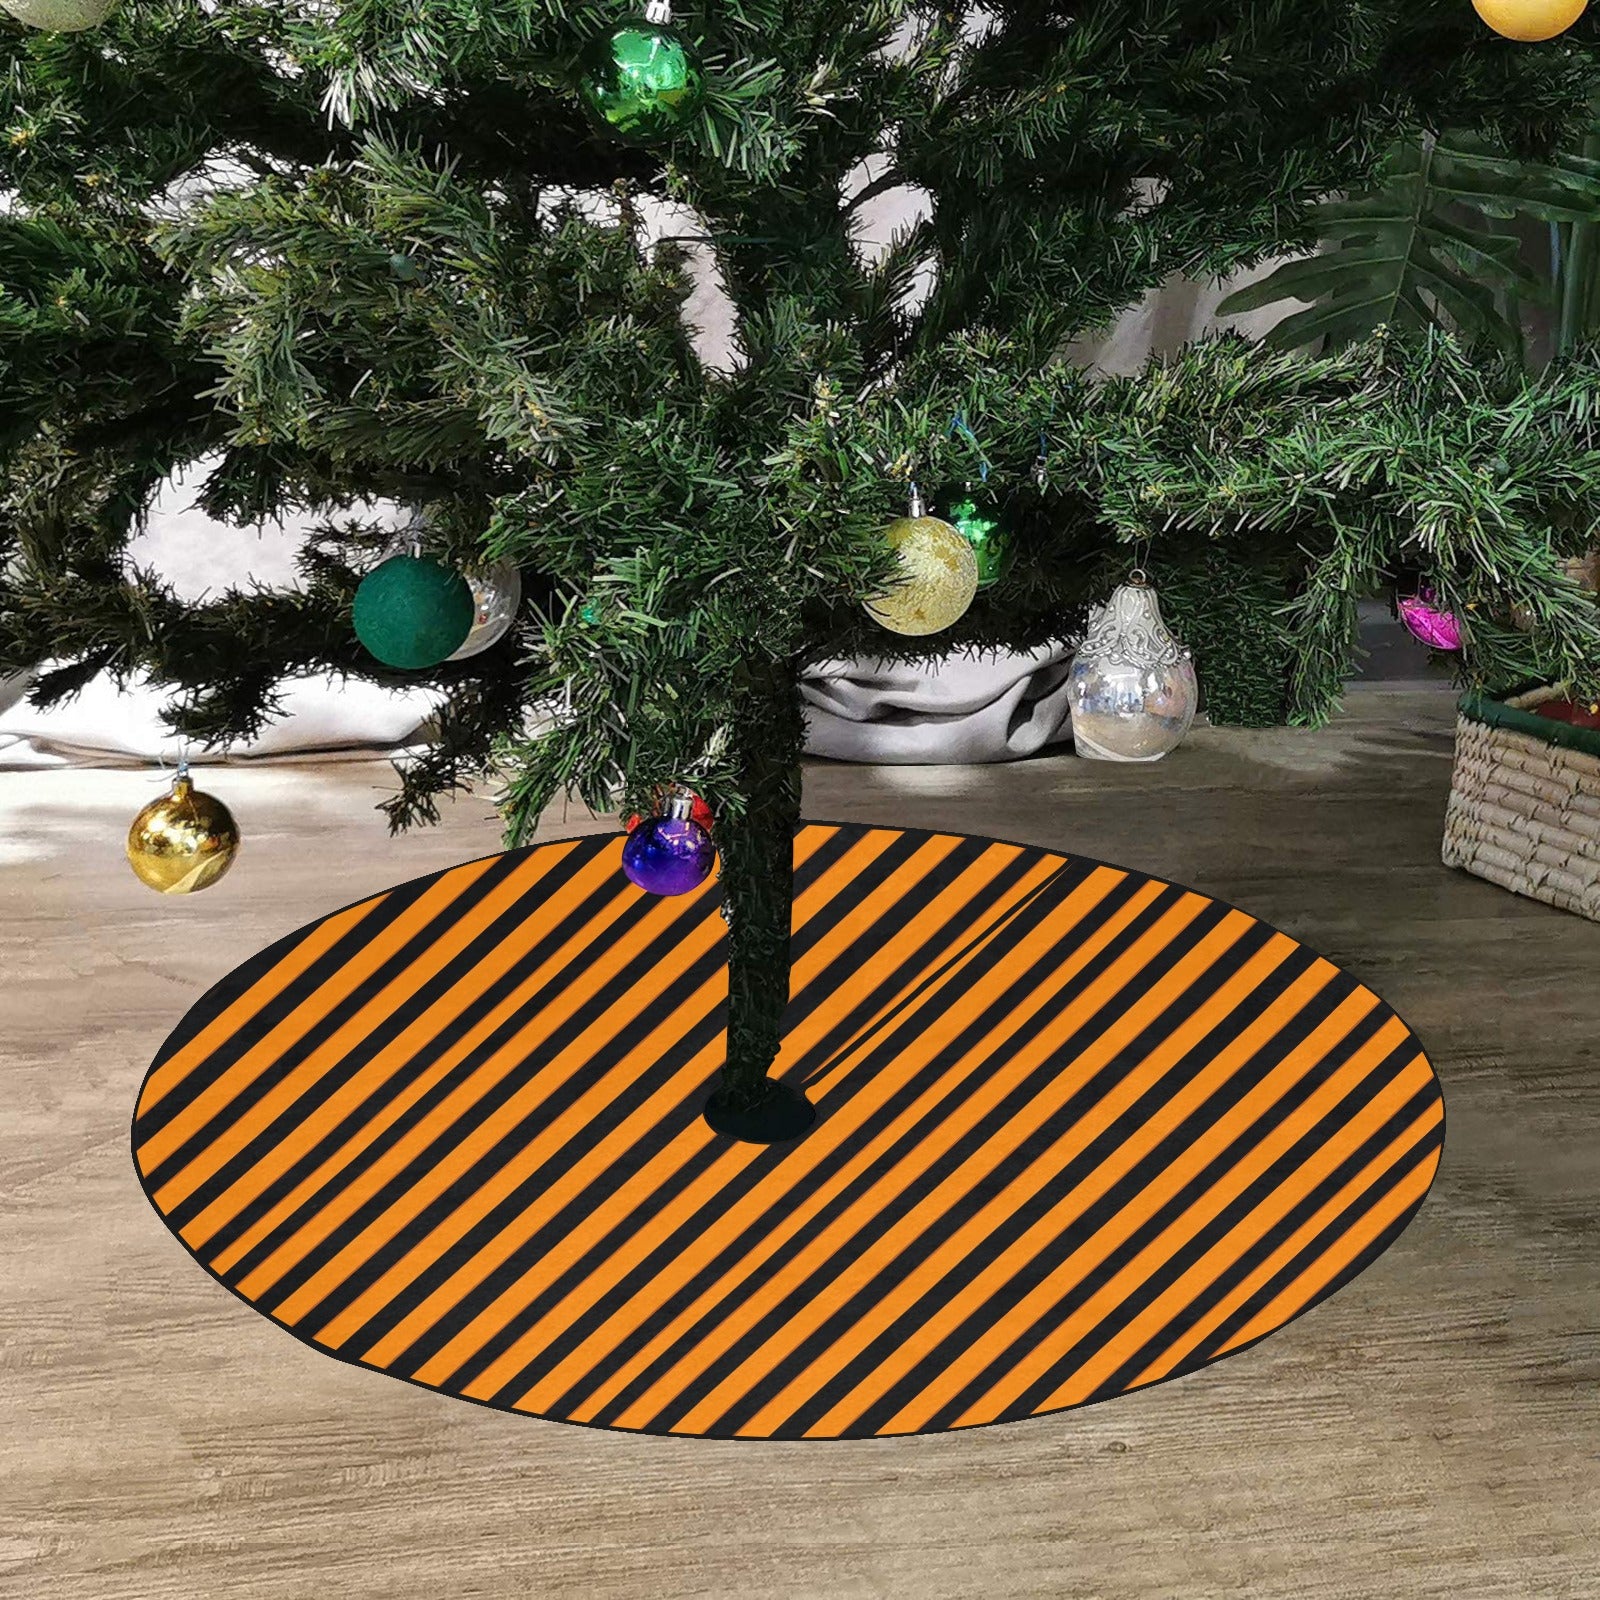 Orange Black Striped Halloween Tree Skirt, Small Large Christmas Stand Base Cover Home Decor Decoration All Hallows Eve Creepy Spooky Party Starcove Fashion